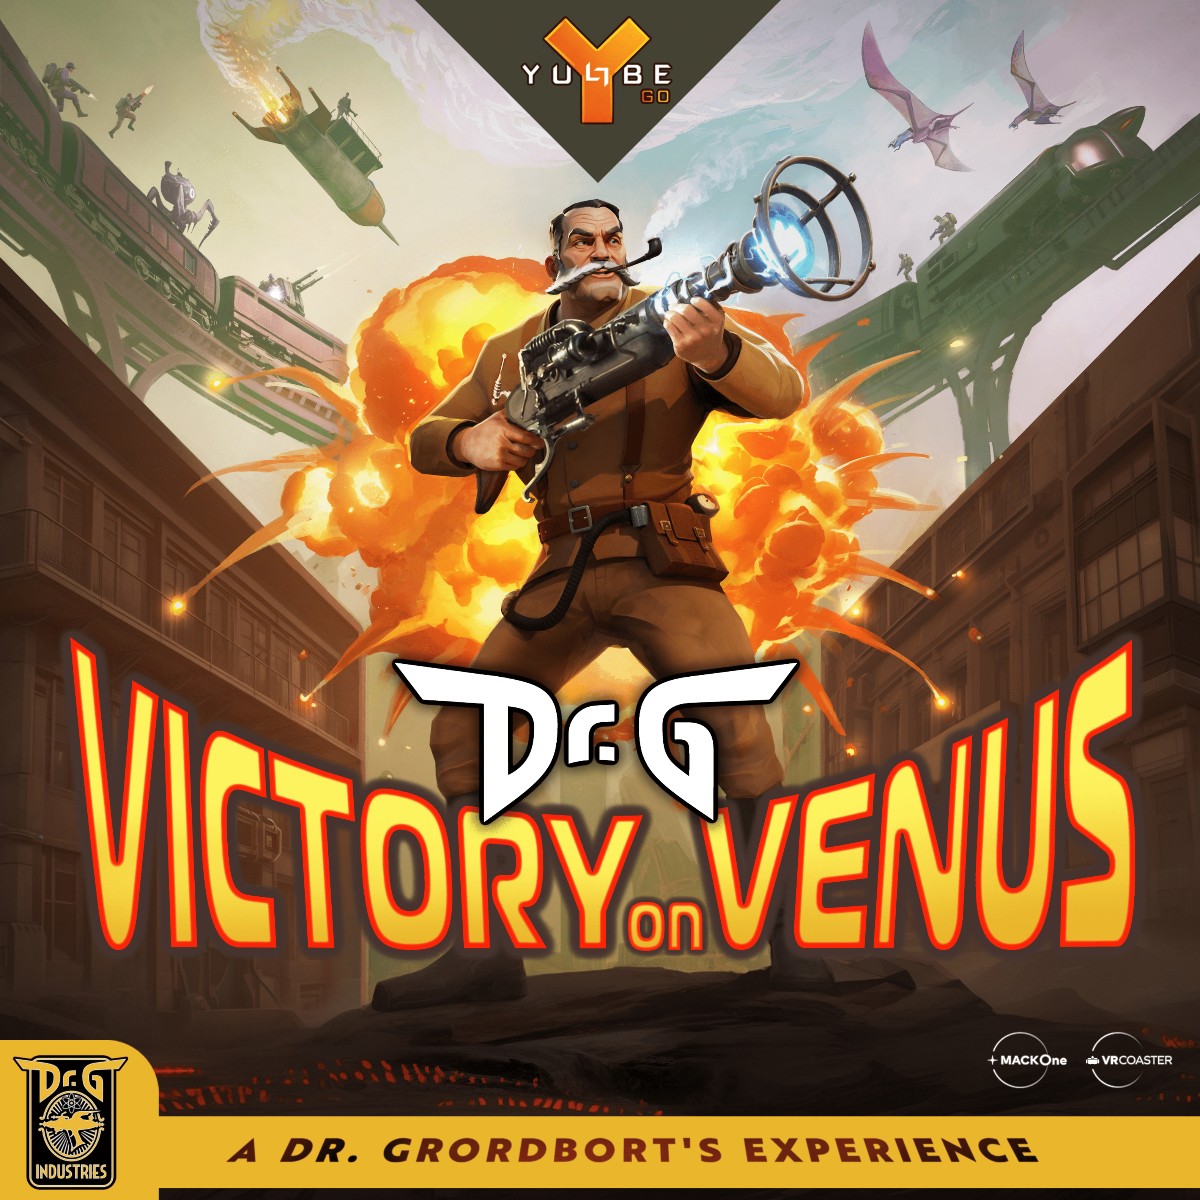 Something exciting is coming to #YULLBE! Dr. G - Victory on Venus will be the latest YULLBE Go experience. Created in collaboration with @WetaWorkshop, it's been fantastic working with five-time Oscar winner Richard Taylor - the experience is set to be extraordinary! 🤩